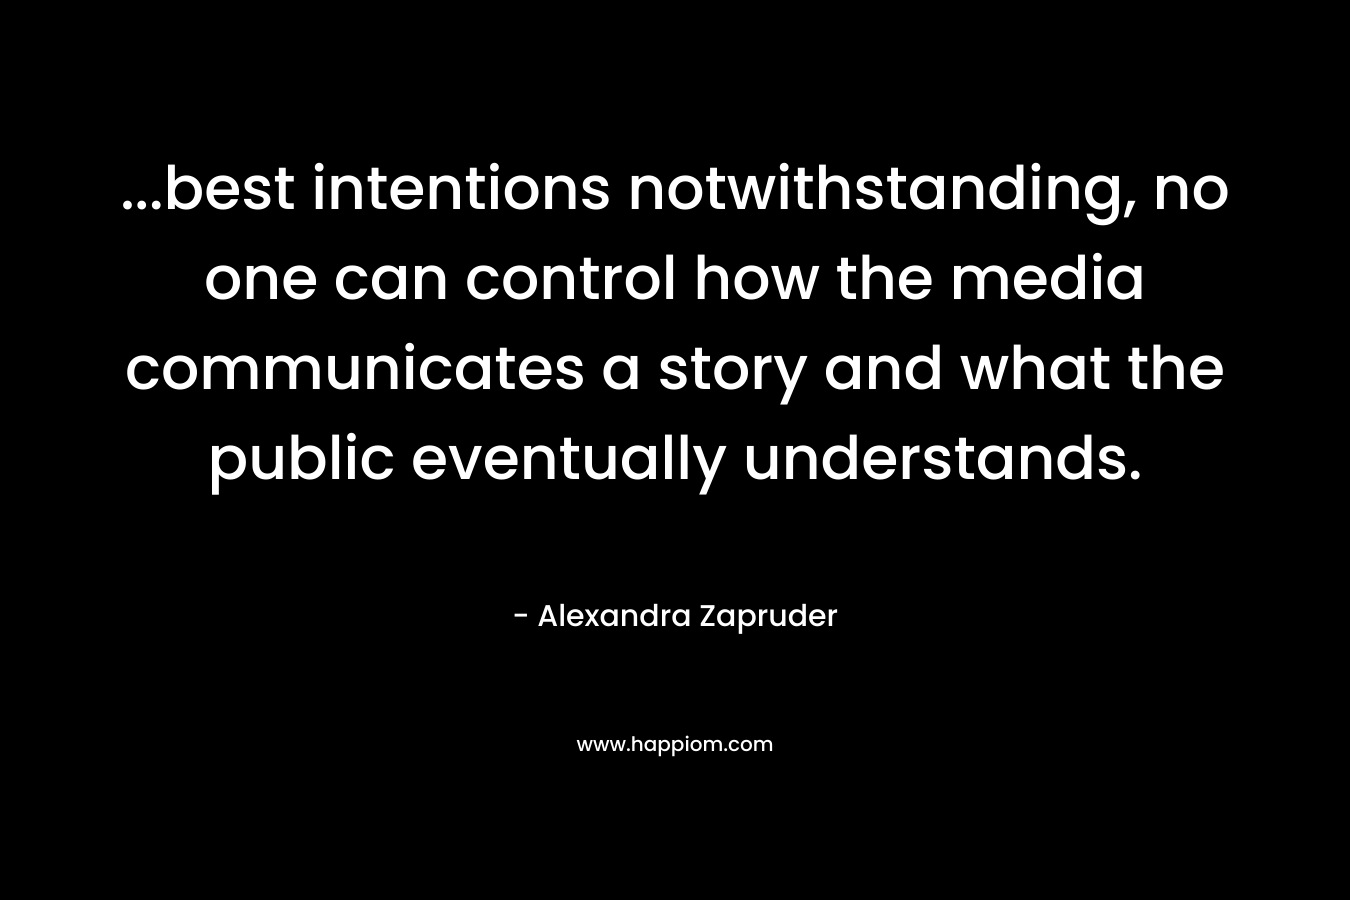 ...best intentions notwithstanding, no one can control how the media communicates a story and what the public eventually understands.